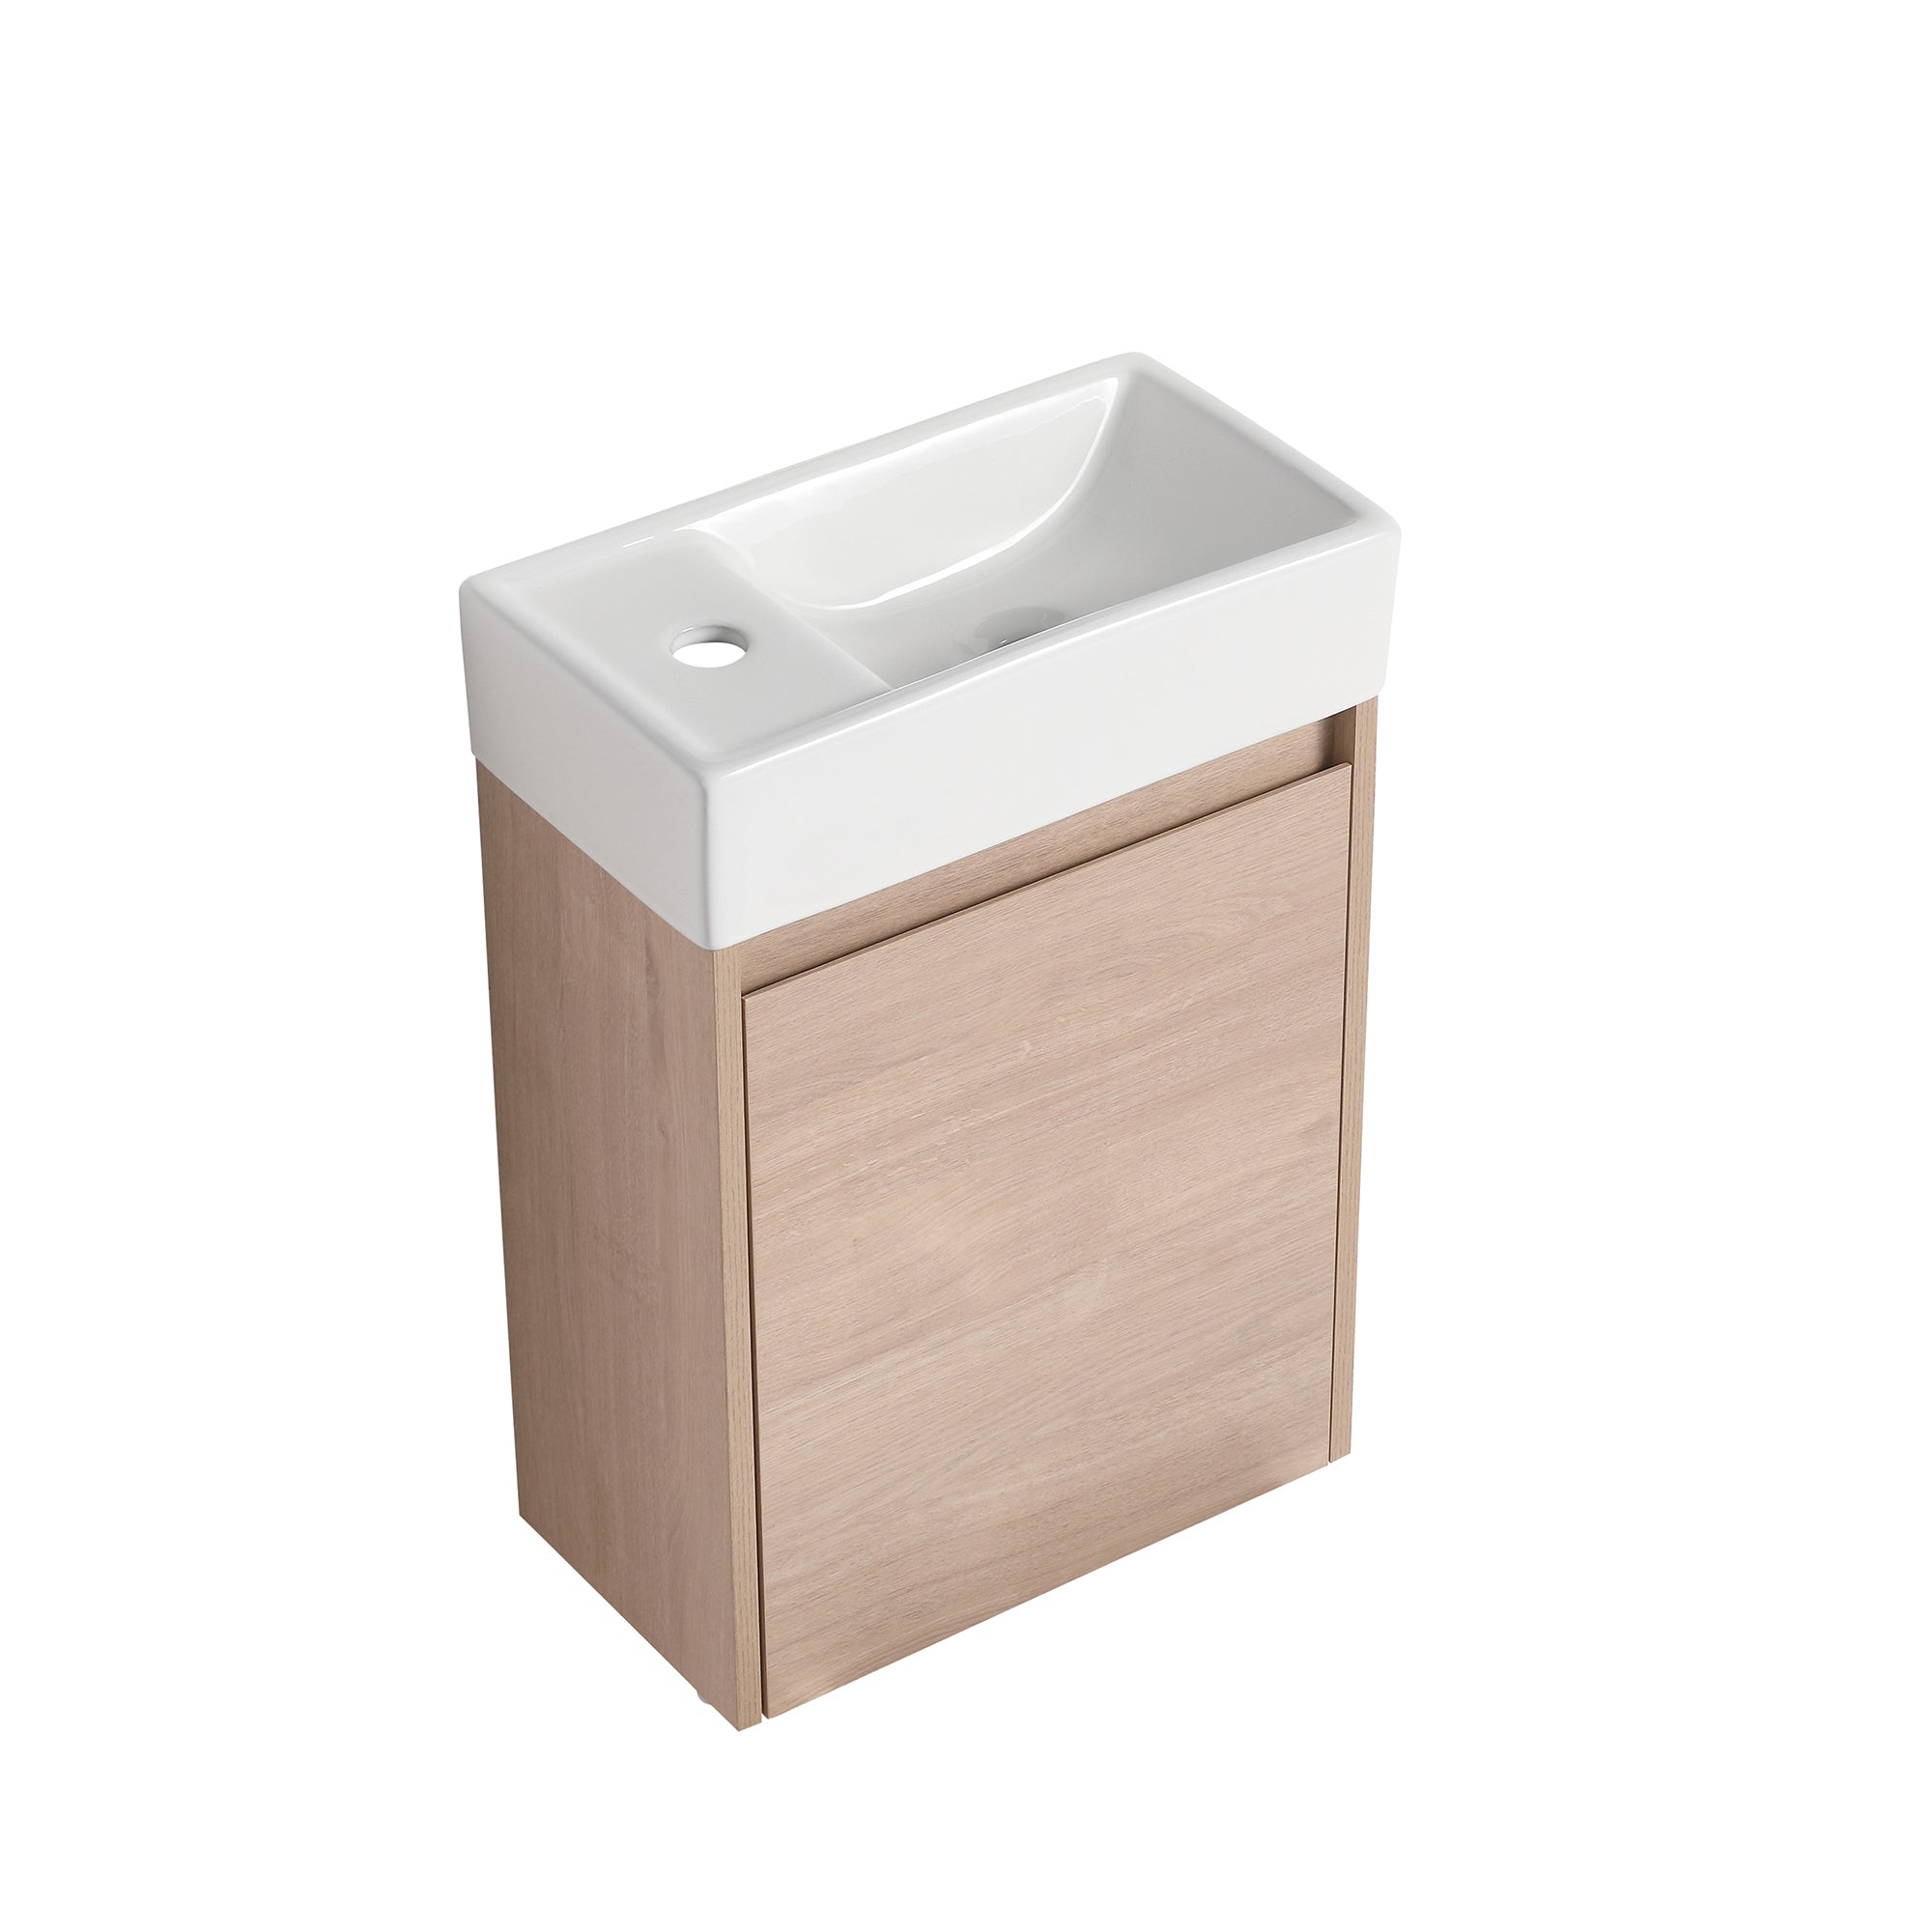 16 in. Plywood Wall Mounted Bathroom Vanity Set in Plain Light Oak with Integrated Ceramic Sink